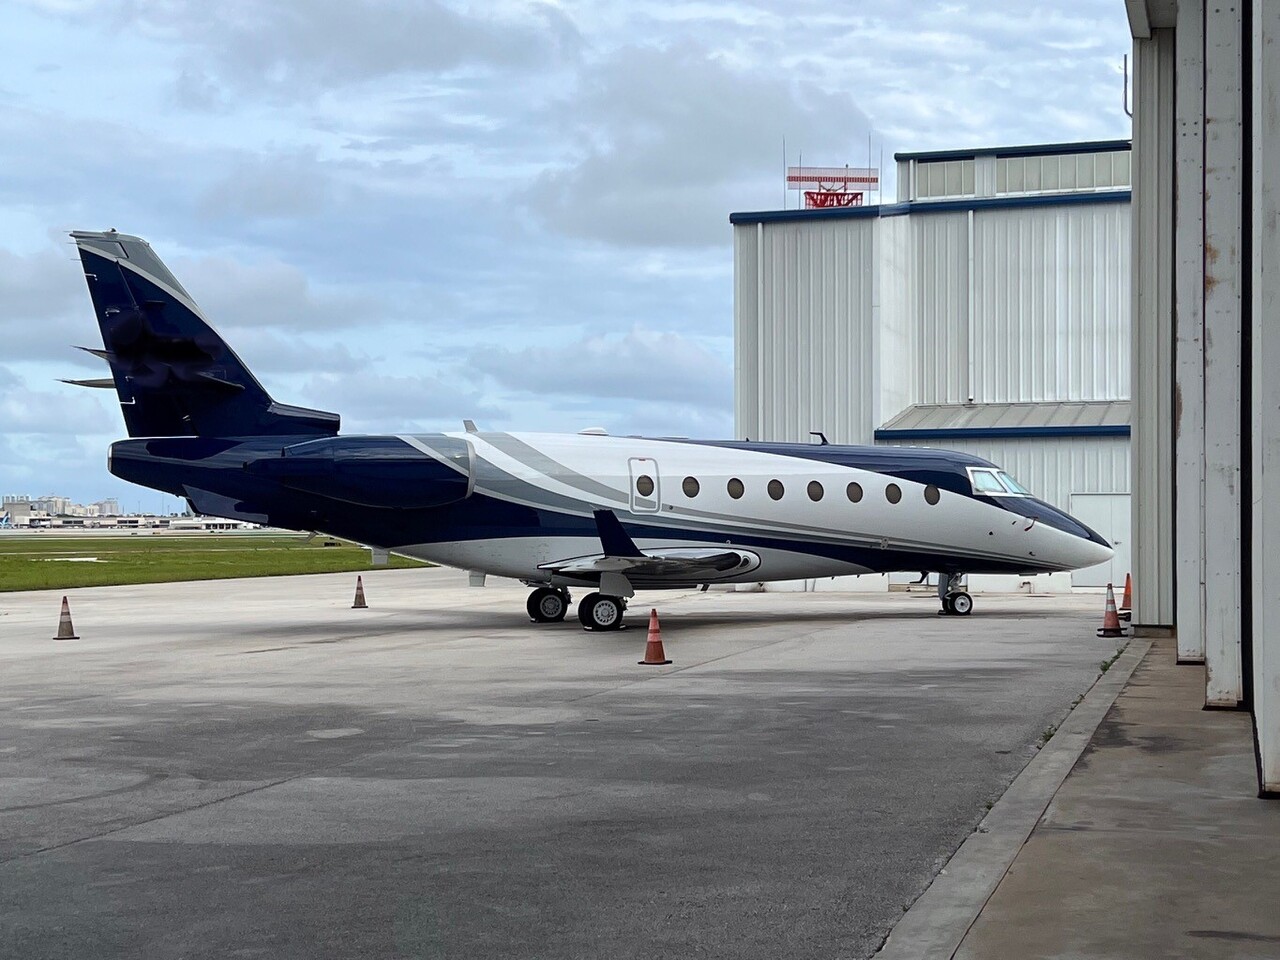 The new Alerion Aviation Gulfstream G200 long-range jet parked in front of the hangar.